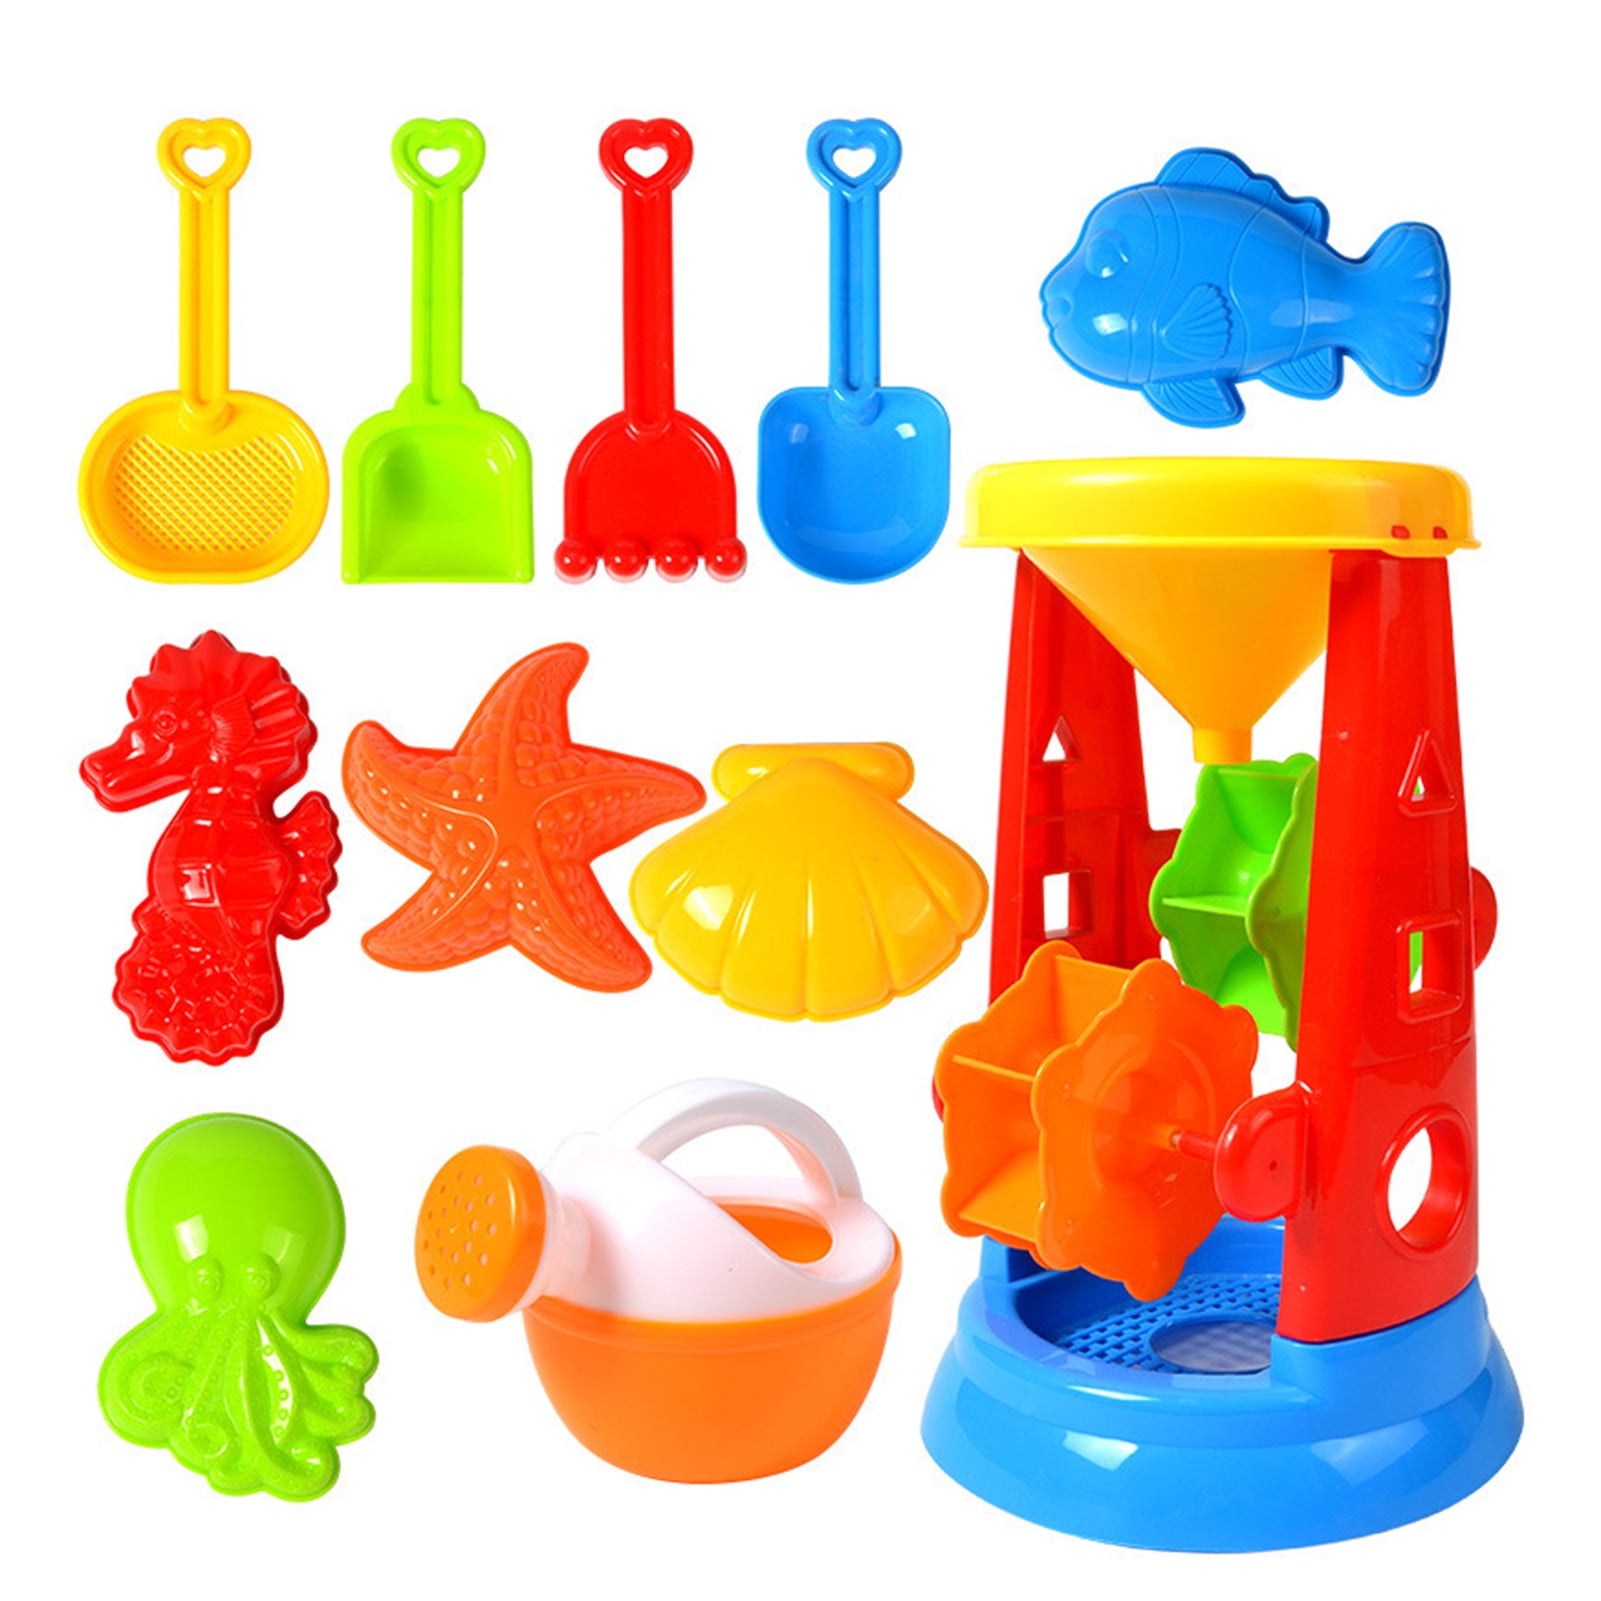 Details about   Kids Children Beach Sand Watering Can Toys Plastic Child Bath Playing Game Fun*